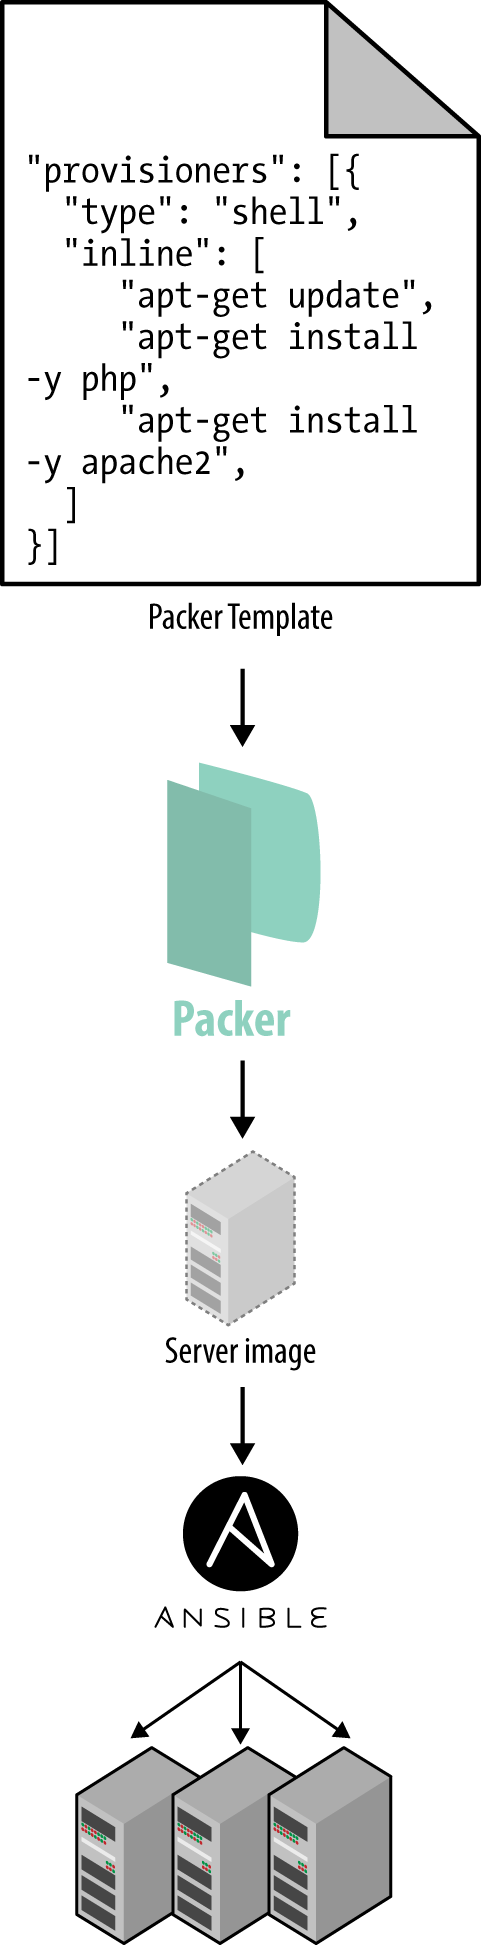 A server templating tool like Packer can be used to create a self-contained image of a server. You can then use other tools, such as Ansible, to install that image across all of your servers.